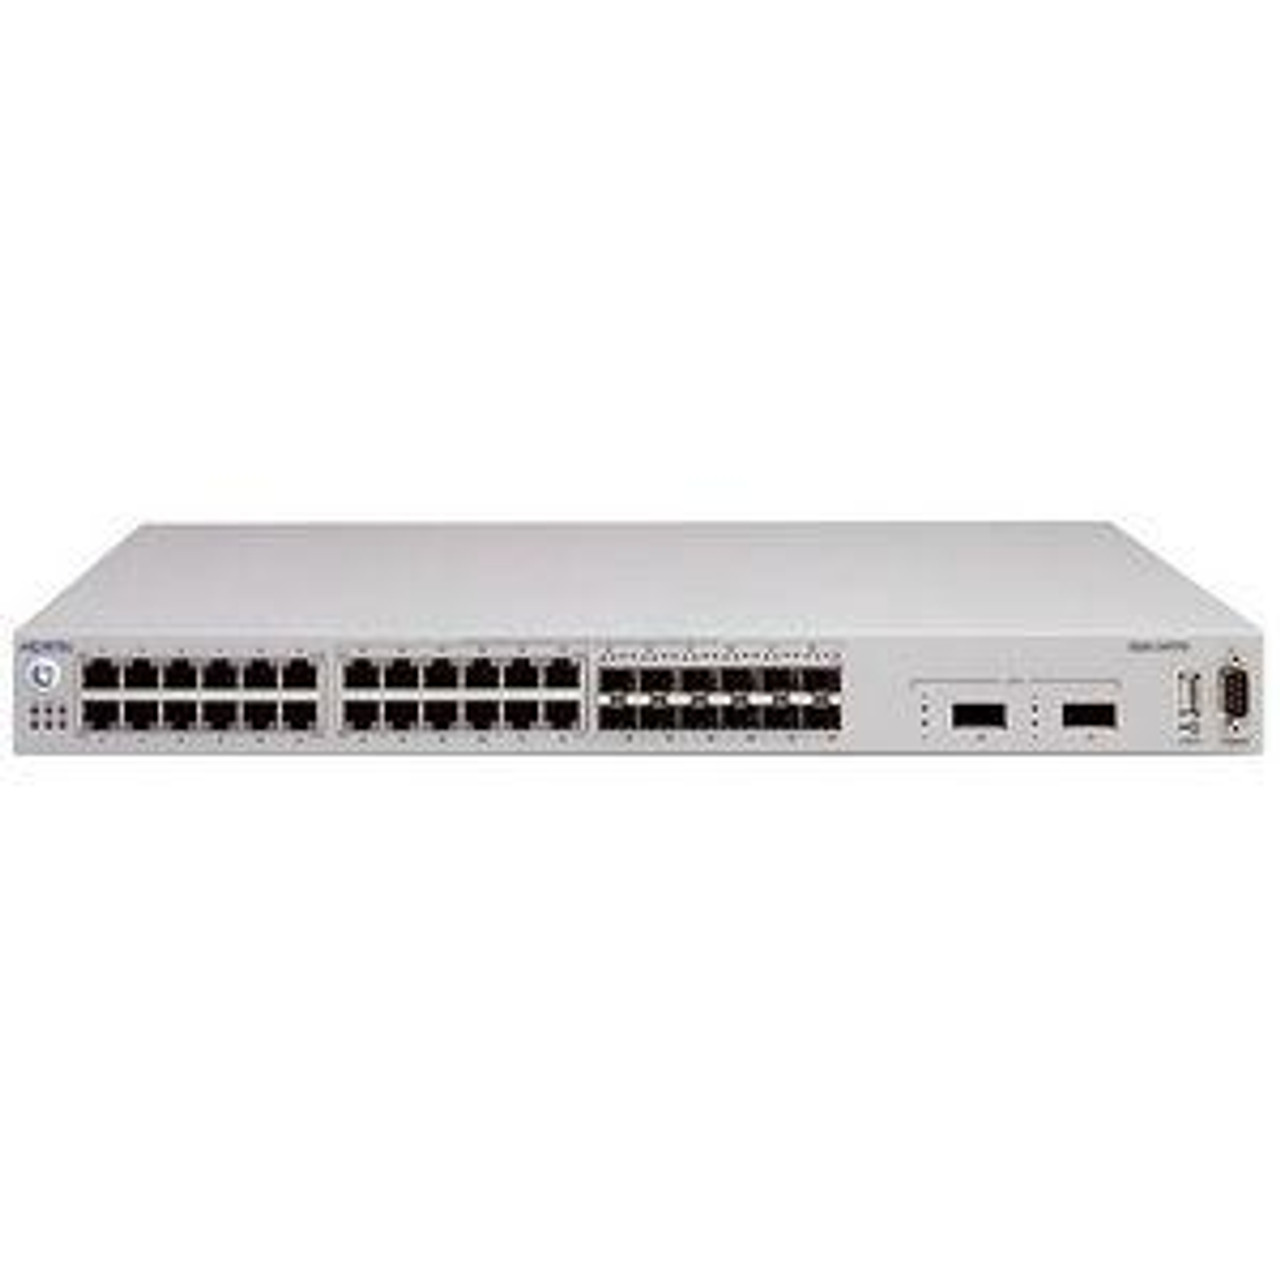 AL1001D07 Nortel Federal TAA. Gigabit Ethernet Routing Switch 5510-48T with 48-Ports SFP 10/100/1000 ports plus 2 fiber mini- GBIC ports including a 1.5 foot